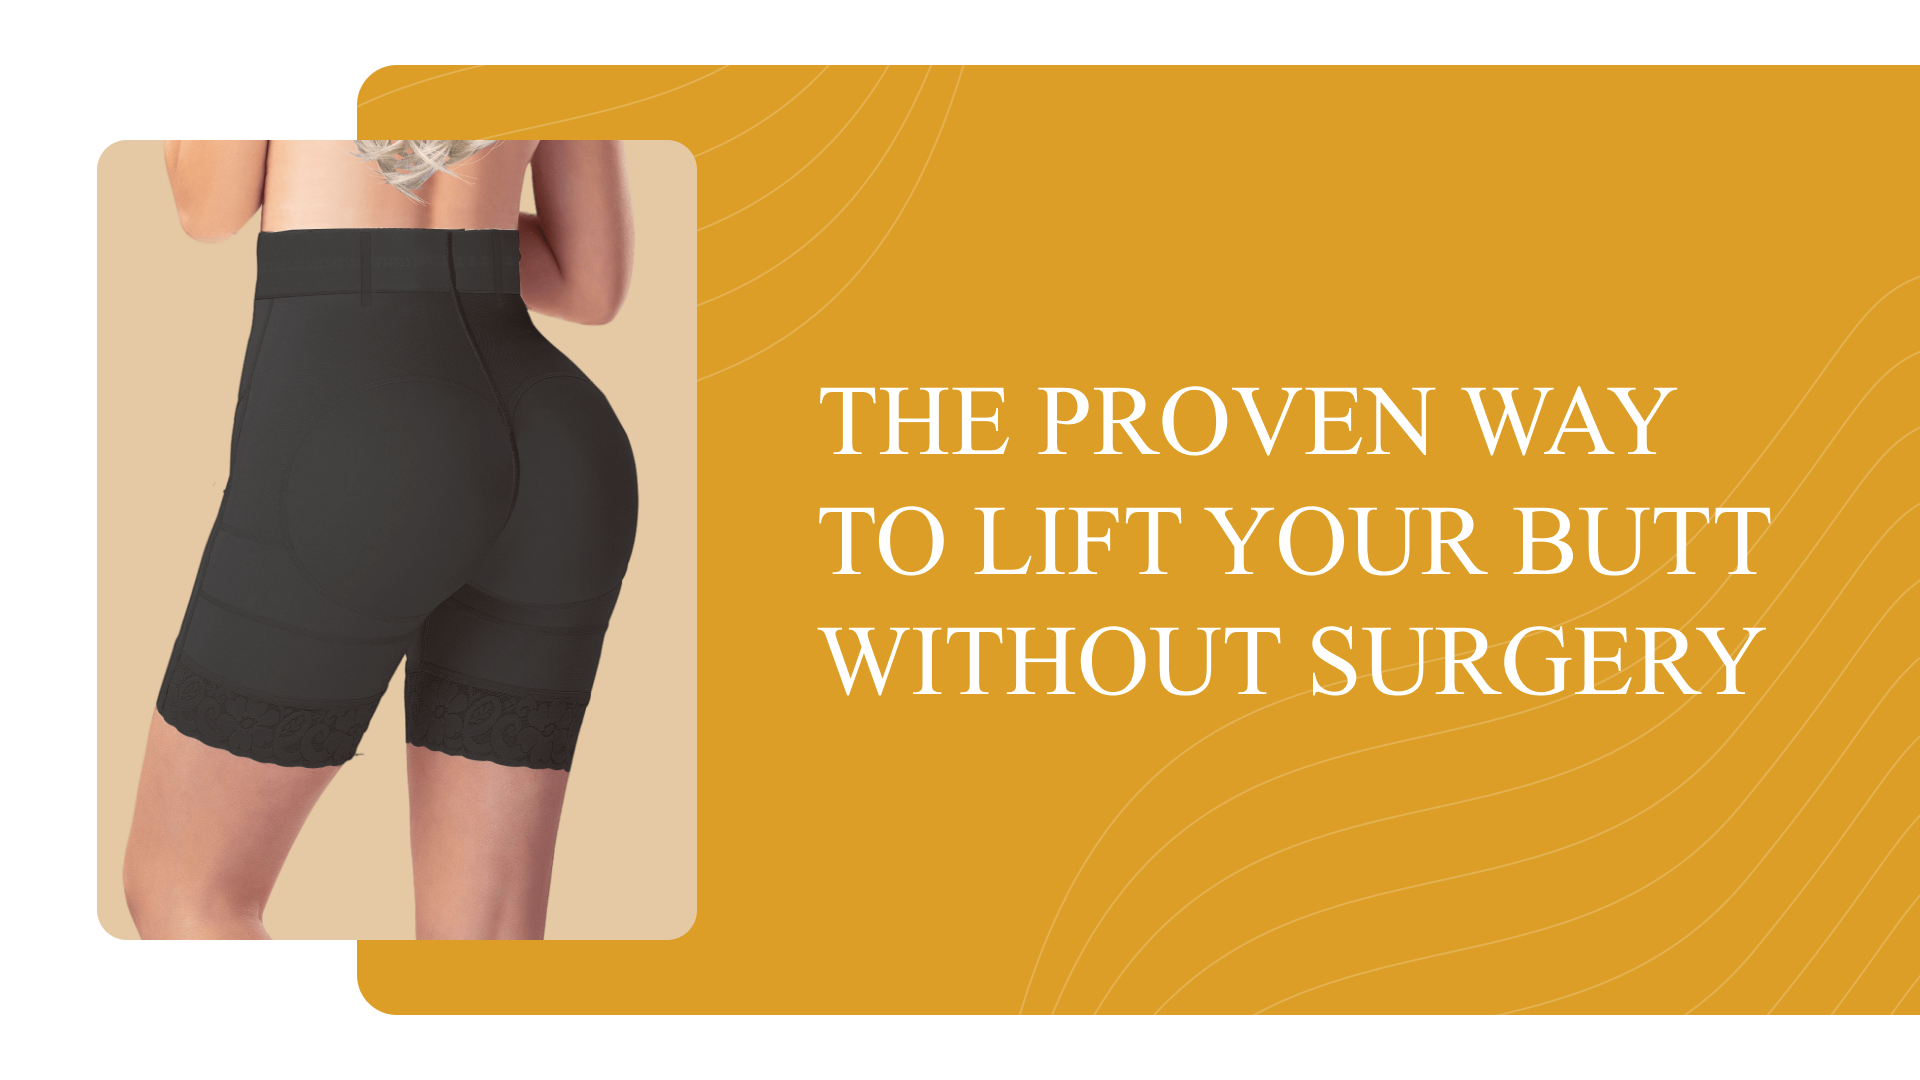 The proven way to Lift Your Butt without surgery